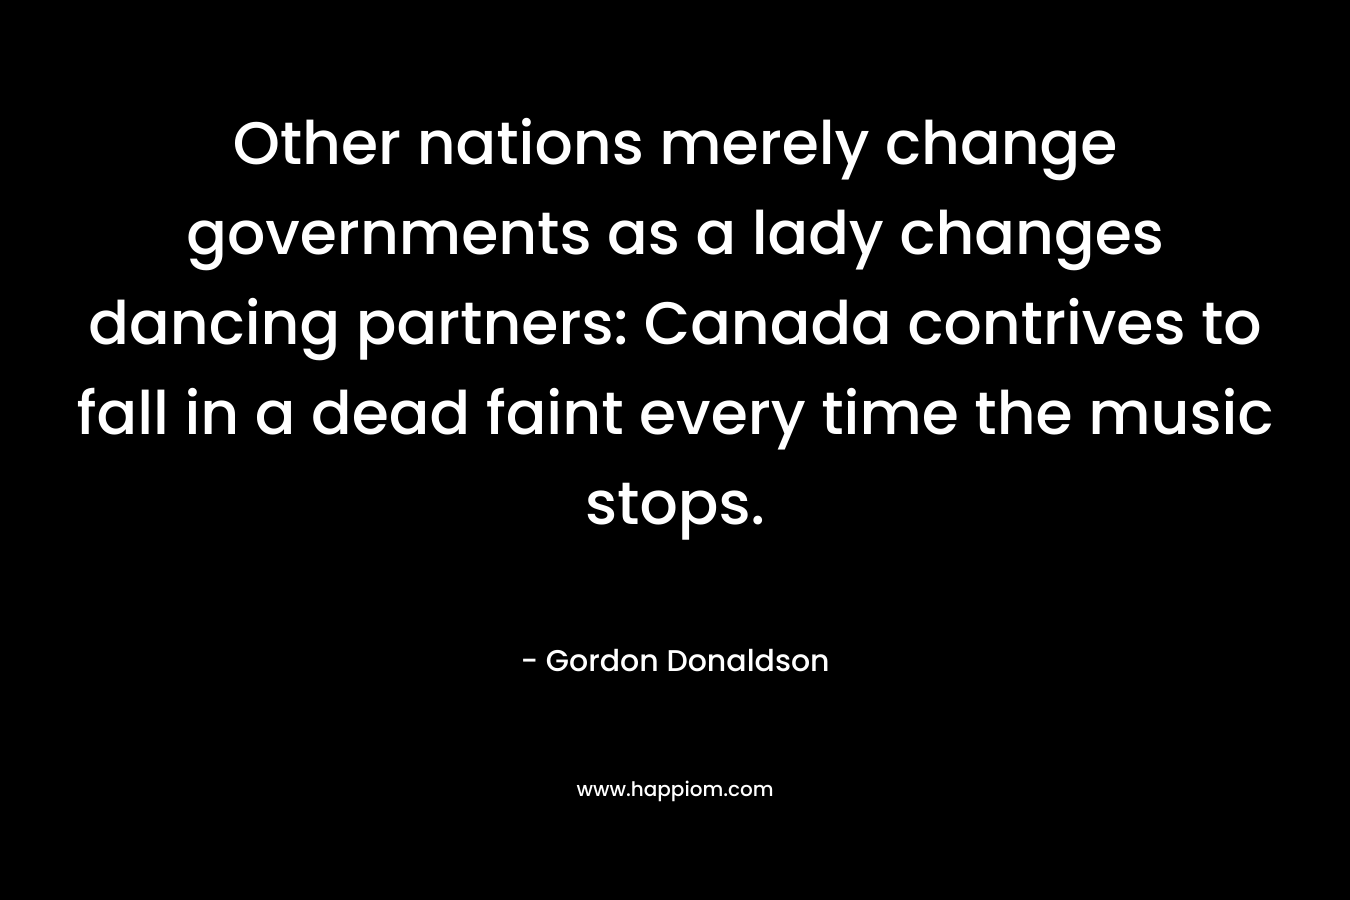 Other nations merely change governments as a lady changes dancing partners: Canada contrives to fall in a dead faint every time the music stops. – Gordon Donaldson